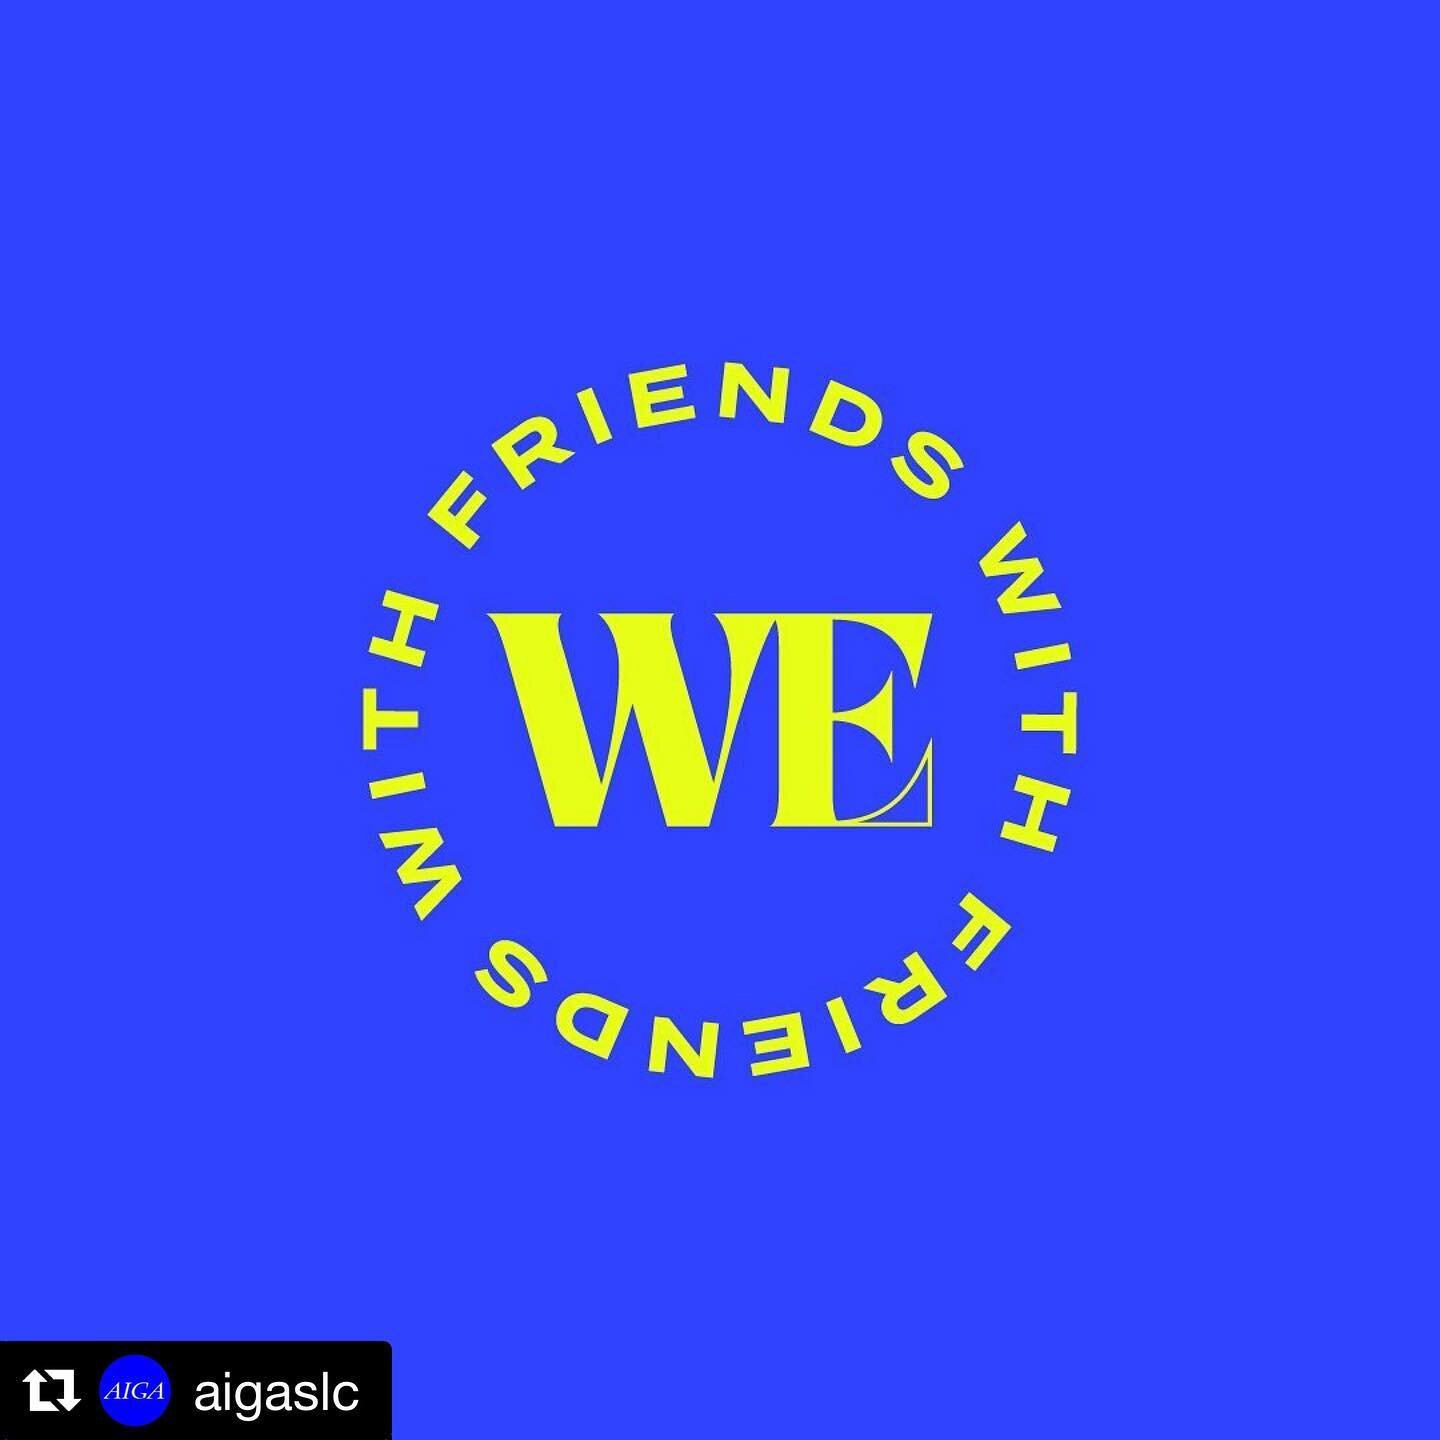 Next week! 5/6, 1pm (MST), I&rsquo;ll be chatting live (IG live!) with @aigaslc about With Friends. Hope to see you there!
&mdash;&mdash;&mdash;
#Repost @aigaslc with @get_repost
・・・
Hello, Friends! We hope you&rsquo;re doing well.  Join us this upco